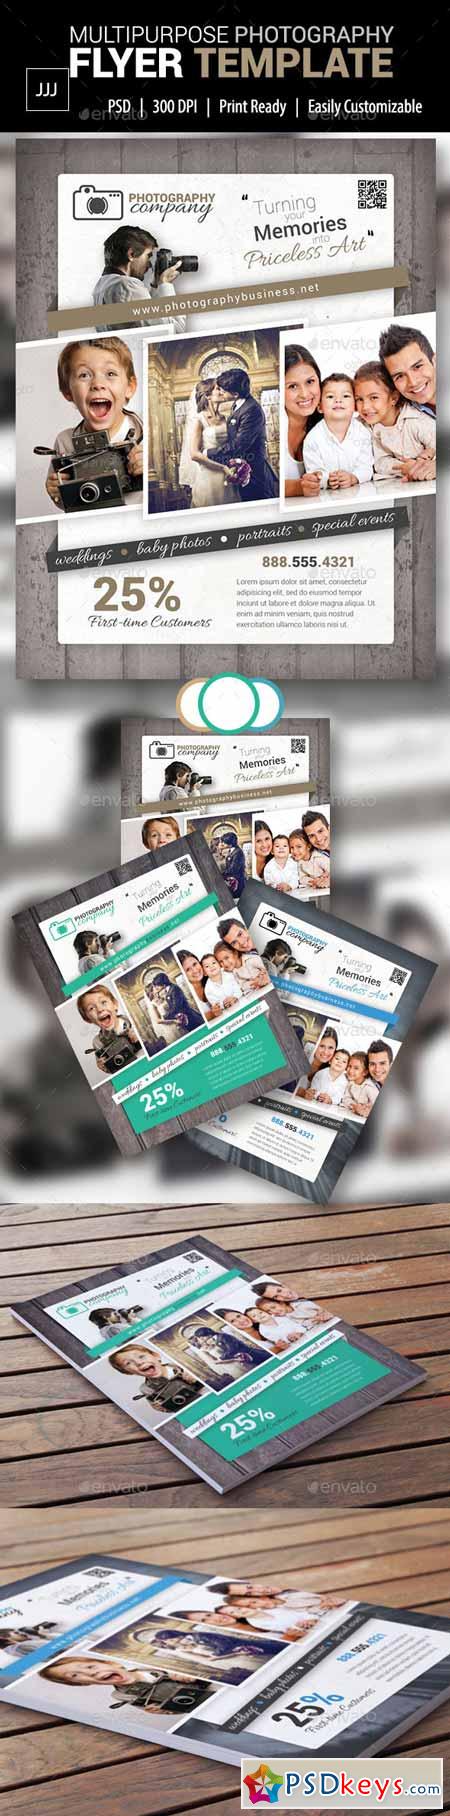 Photography Business Flyer 15 10586271